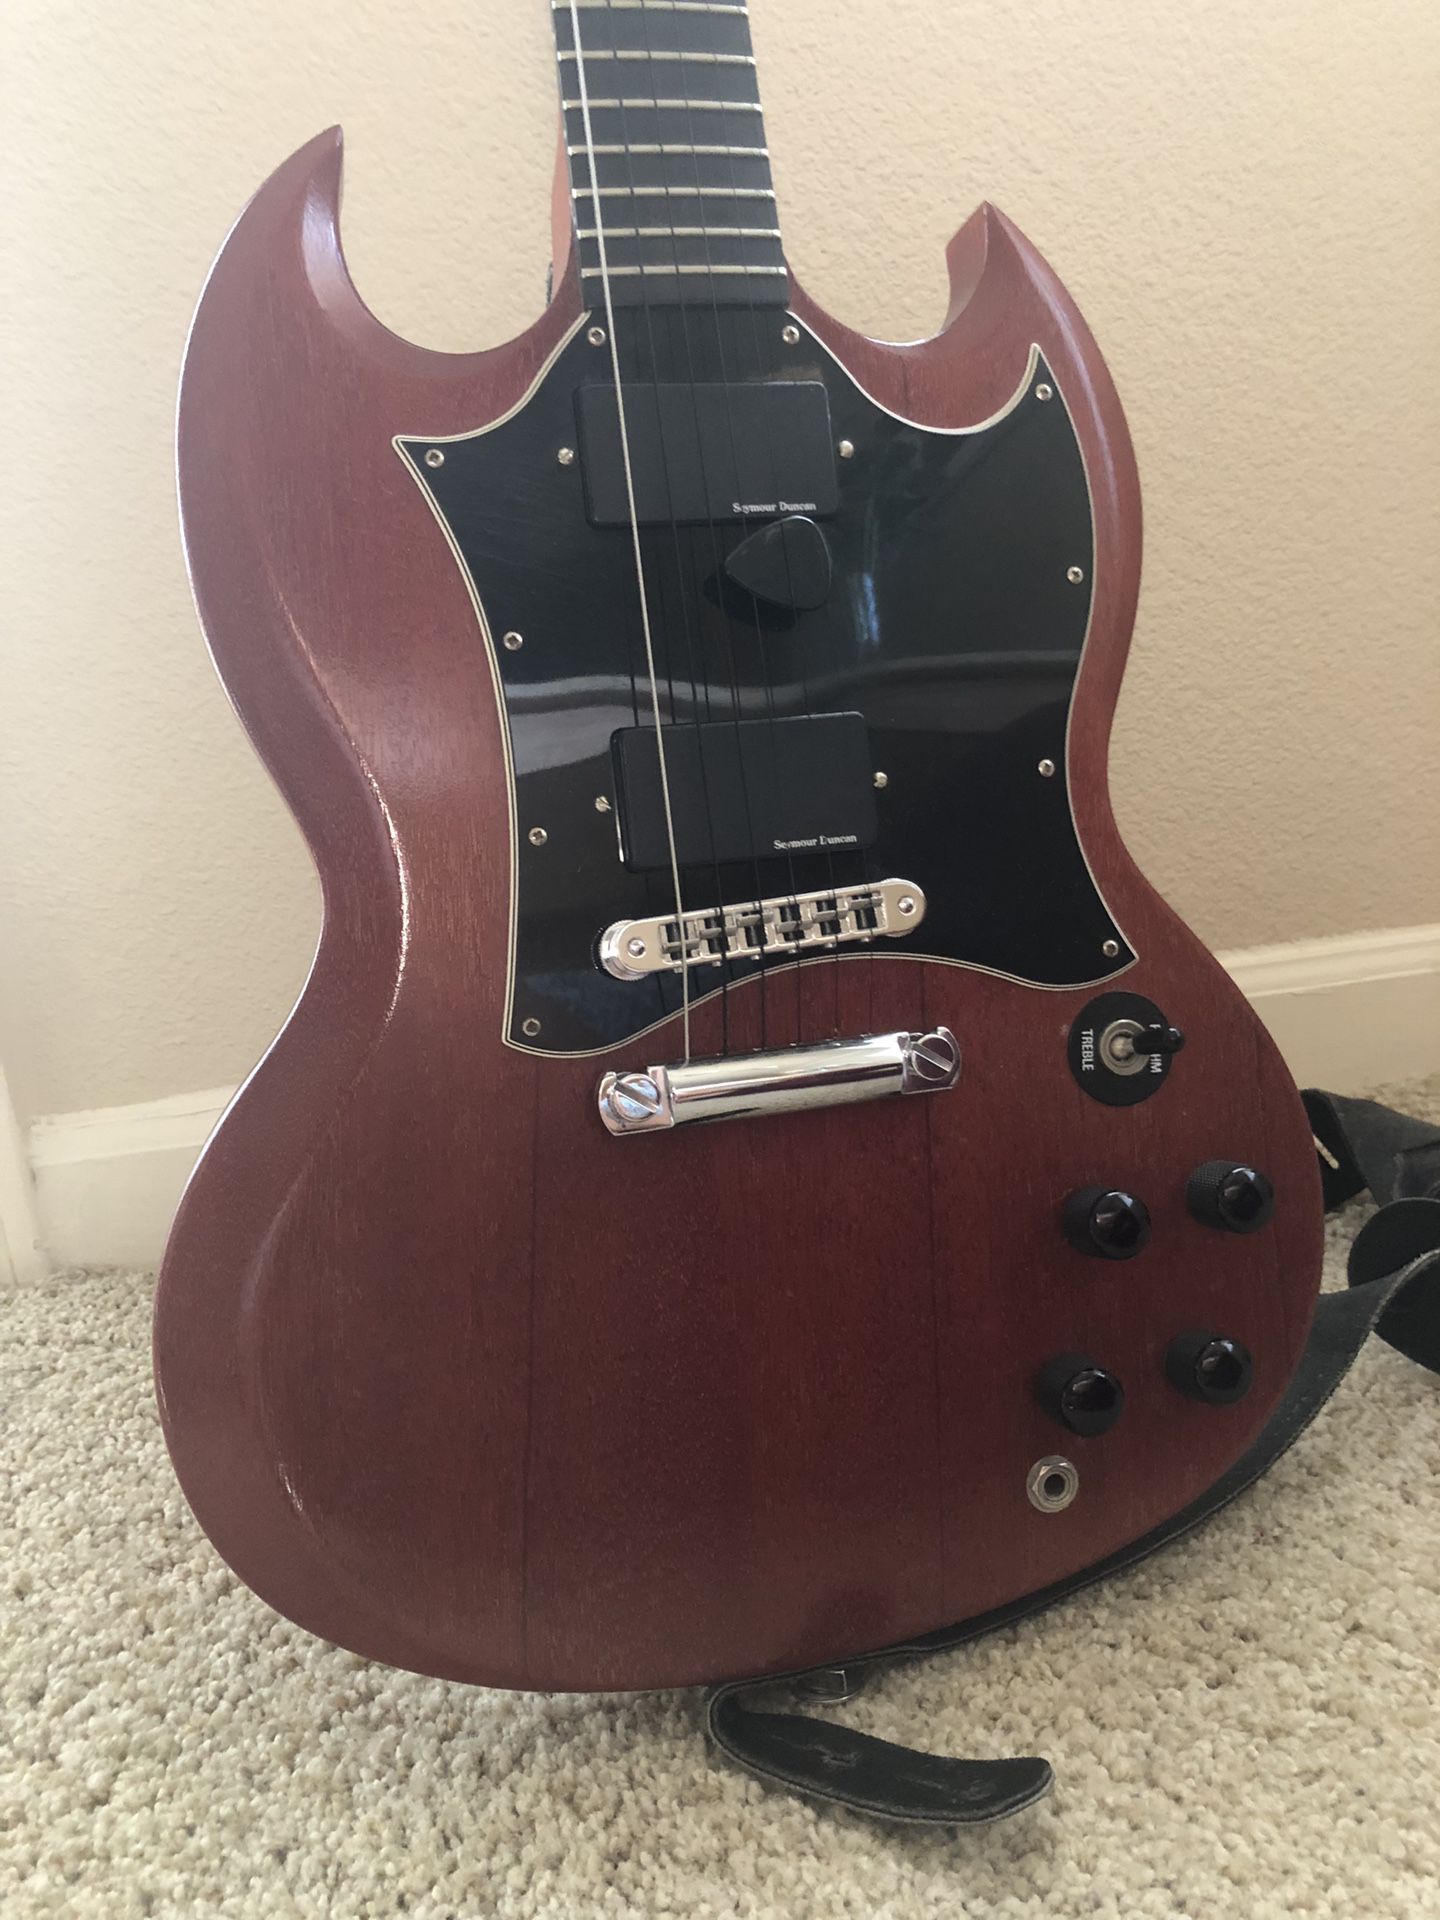 Gibson SG American made, Original worn faded cherry, with ebony fretboard and crescent moon inlays